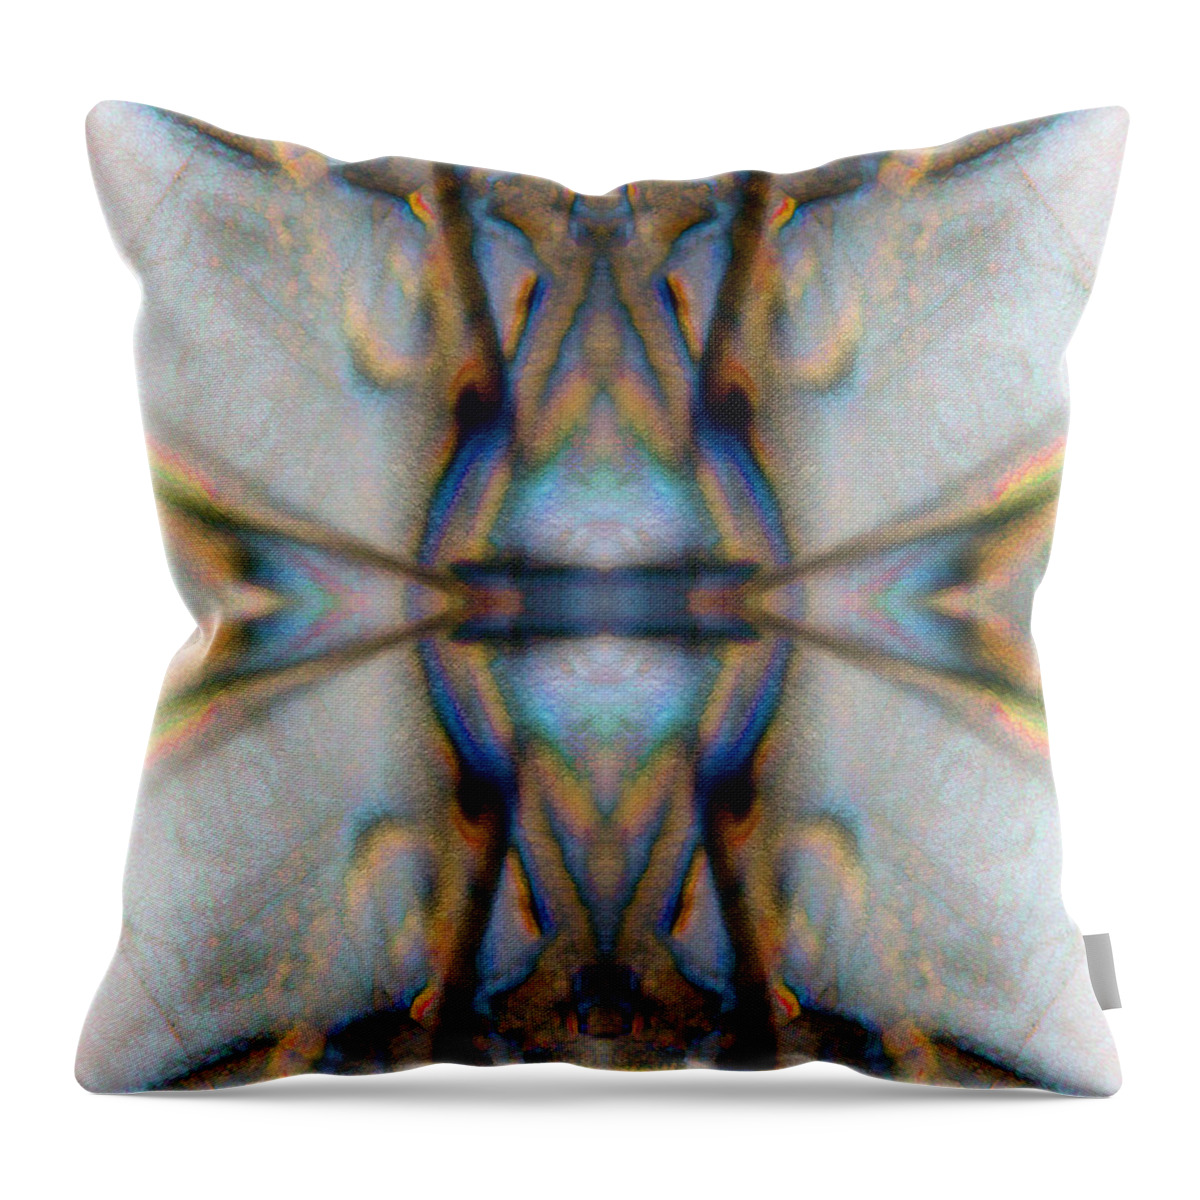 Digital Throw Pillow featuring the digital art Blanket_0018 by Alex W McDonell